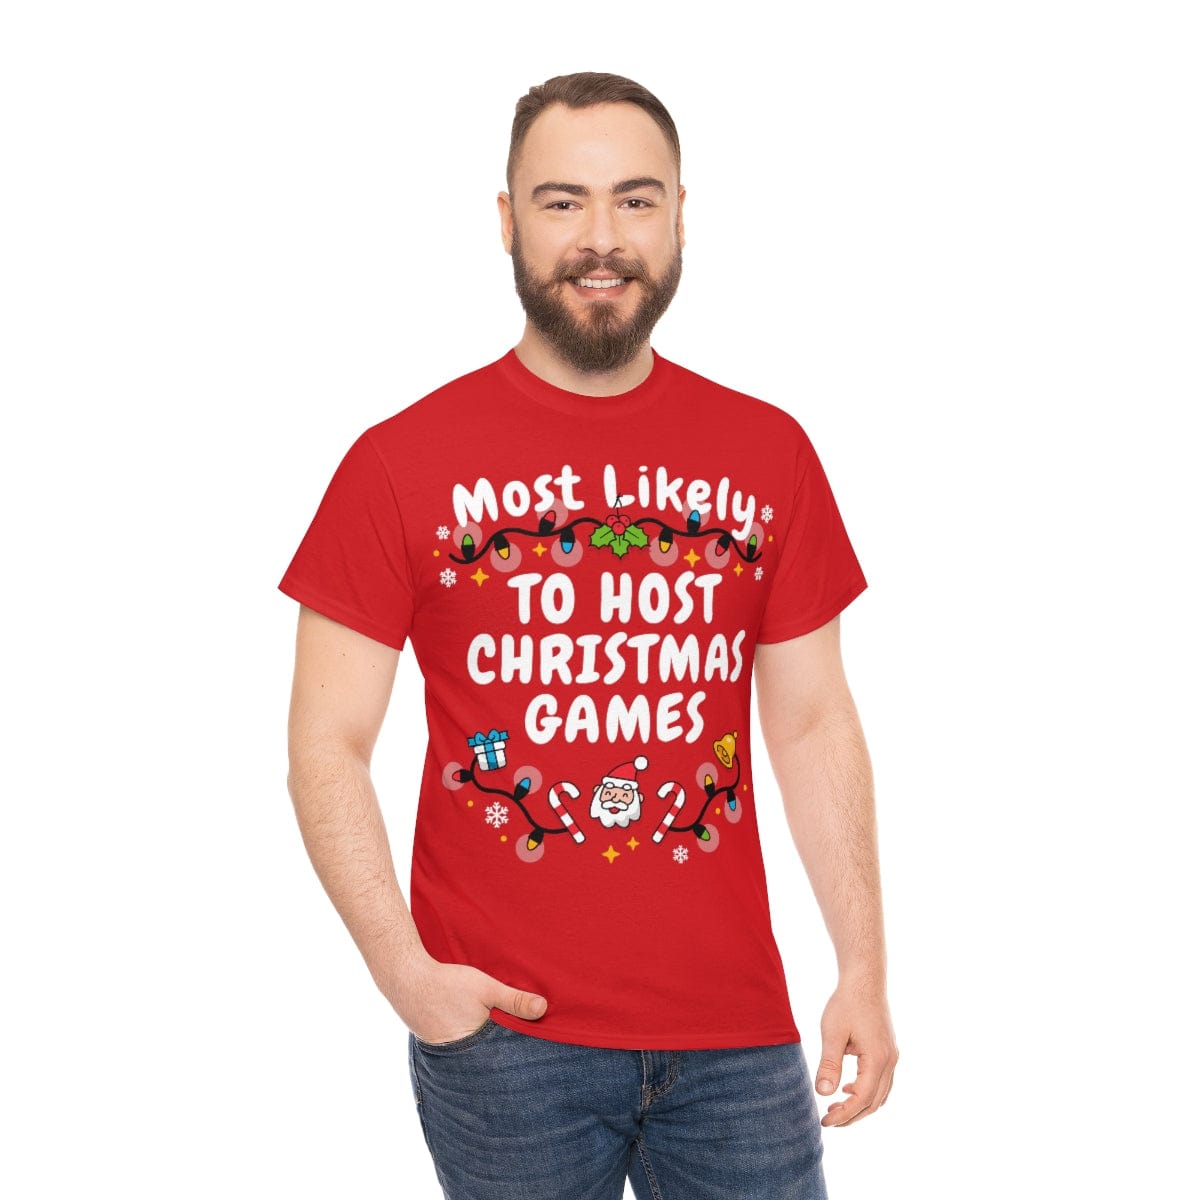 TO HOST CHRISTMAS GAMES